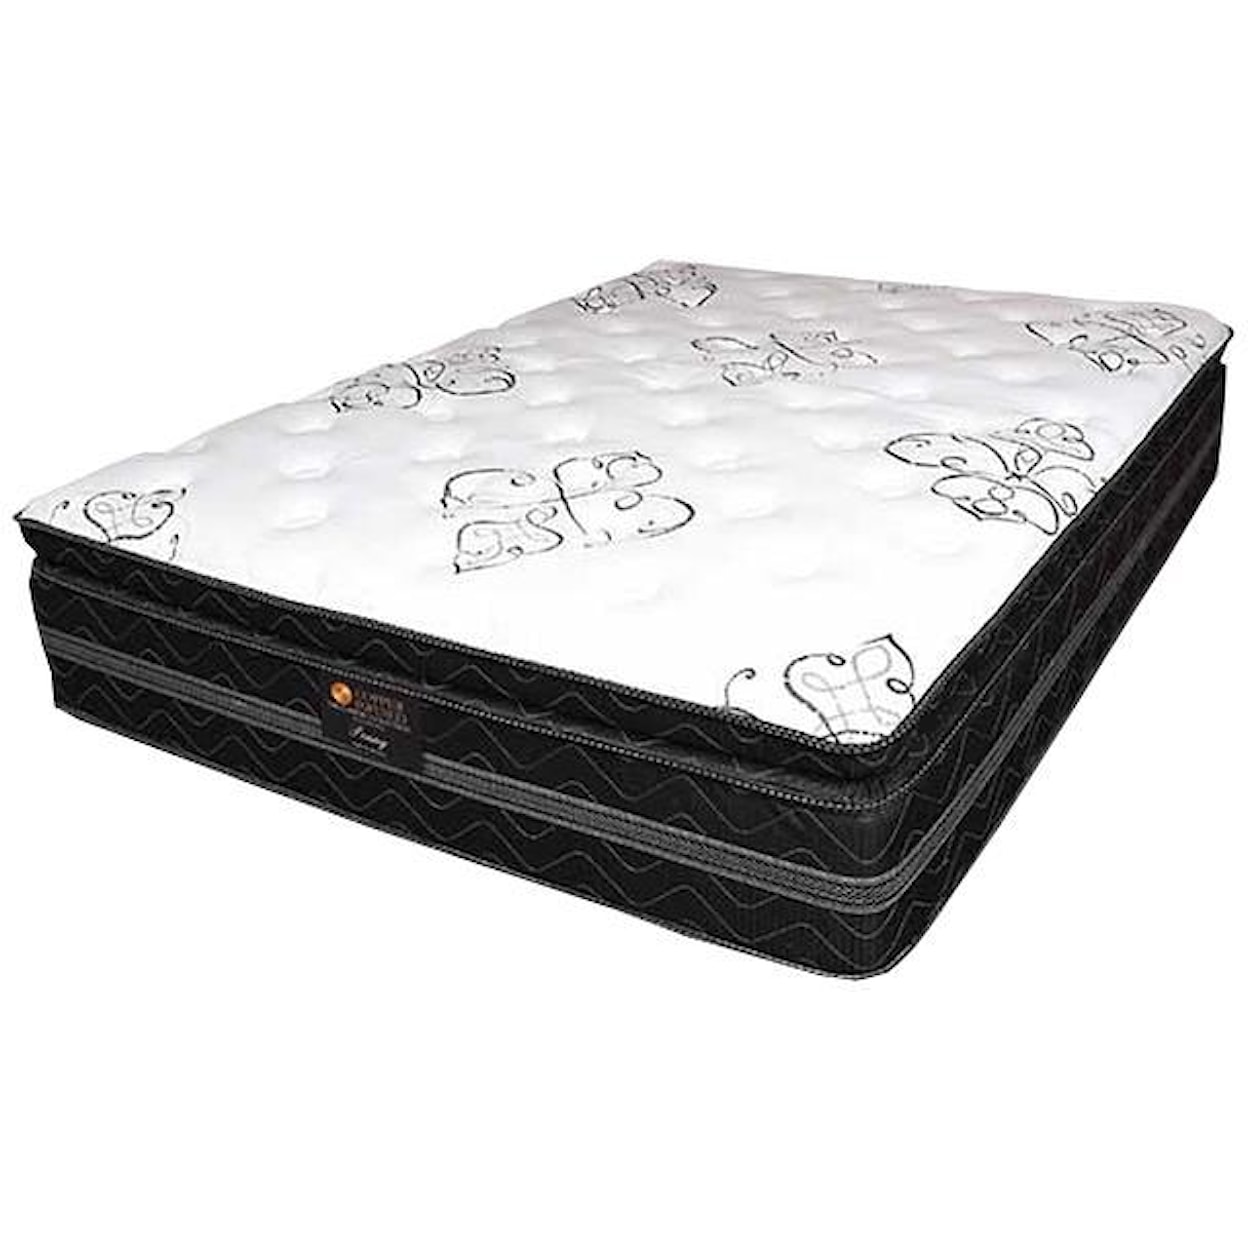 United Bedding Penny PSBT Full Pocketed Coil Mattress